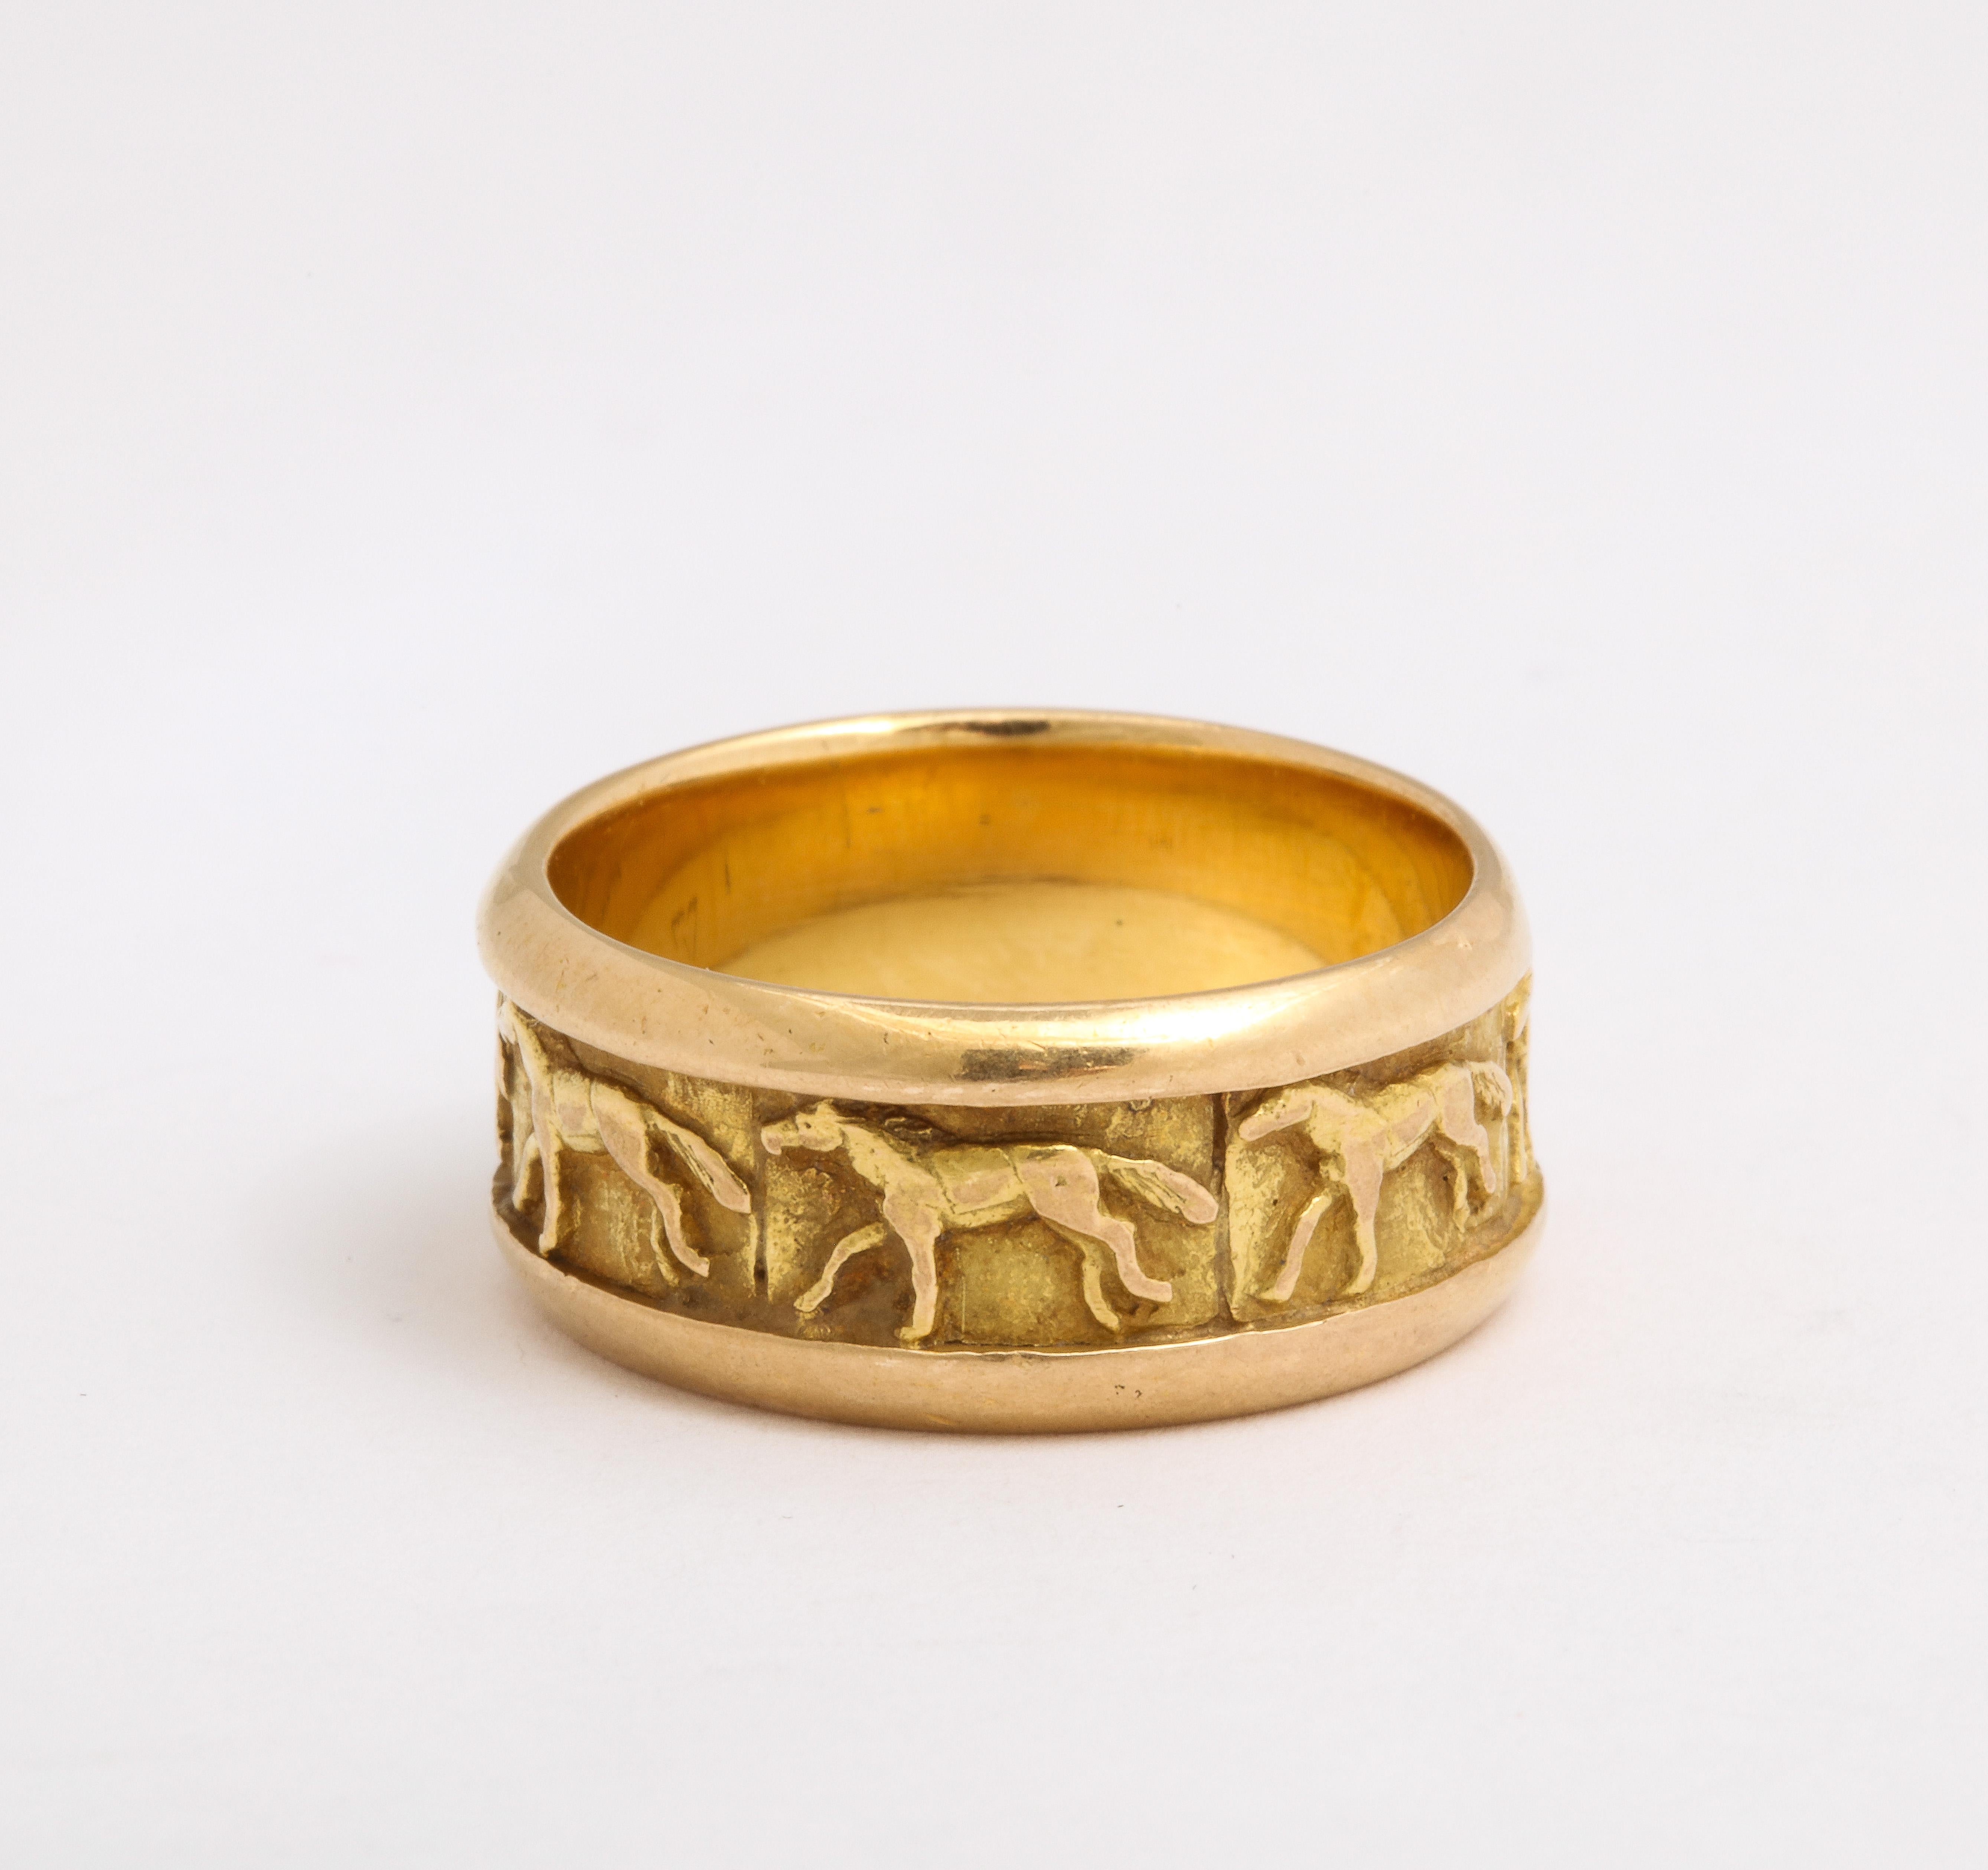 Design enthusiasts and equestrian devotees and animal lovers will appreciate this 18 kt gold chunky band with horses racing around its circumfrence.  The horses are raised from the background. The method of construction is unique. It is made in